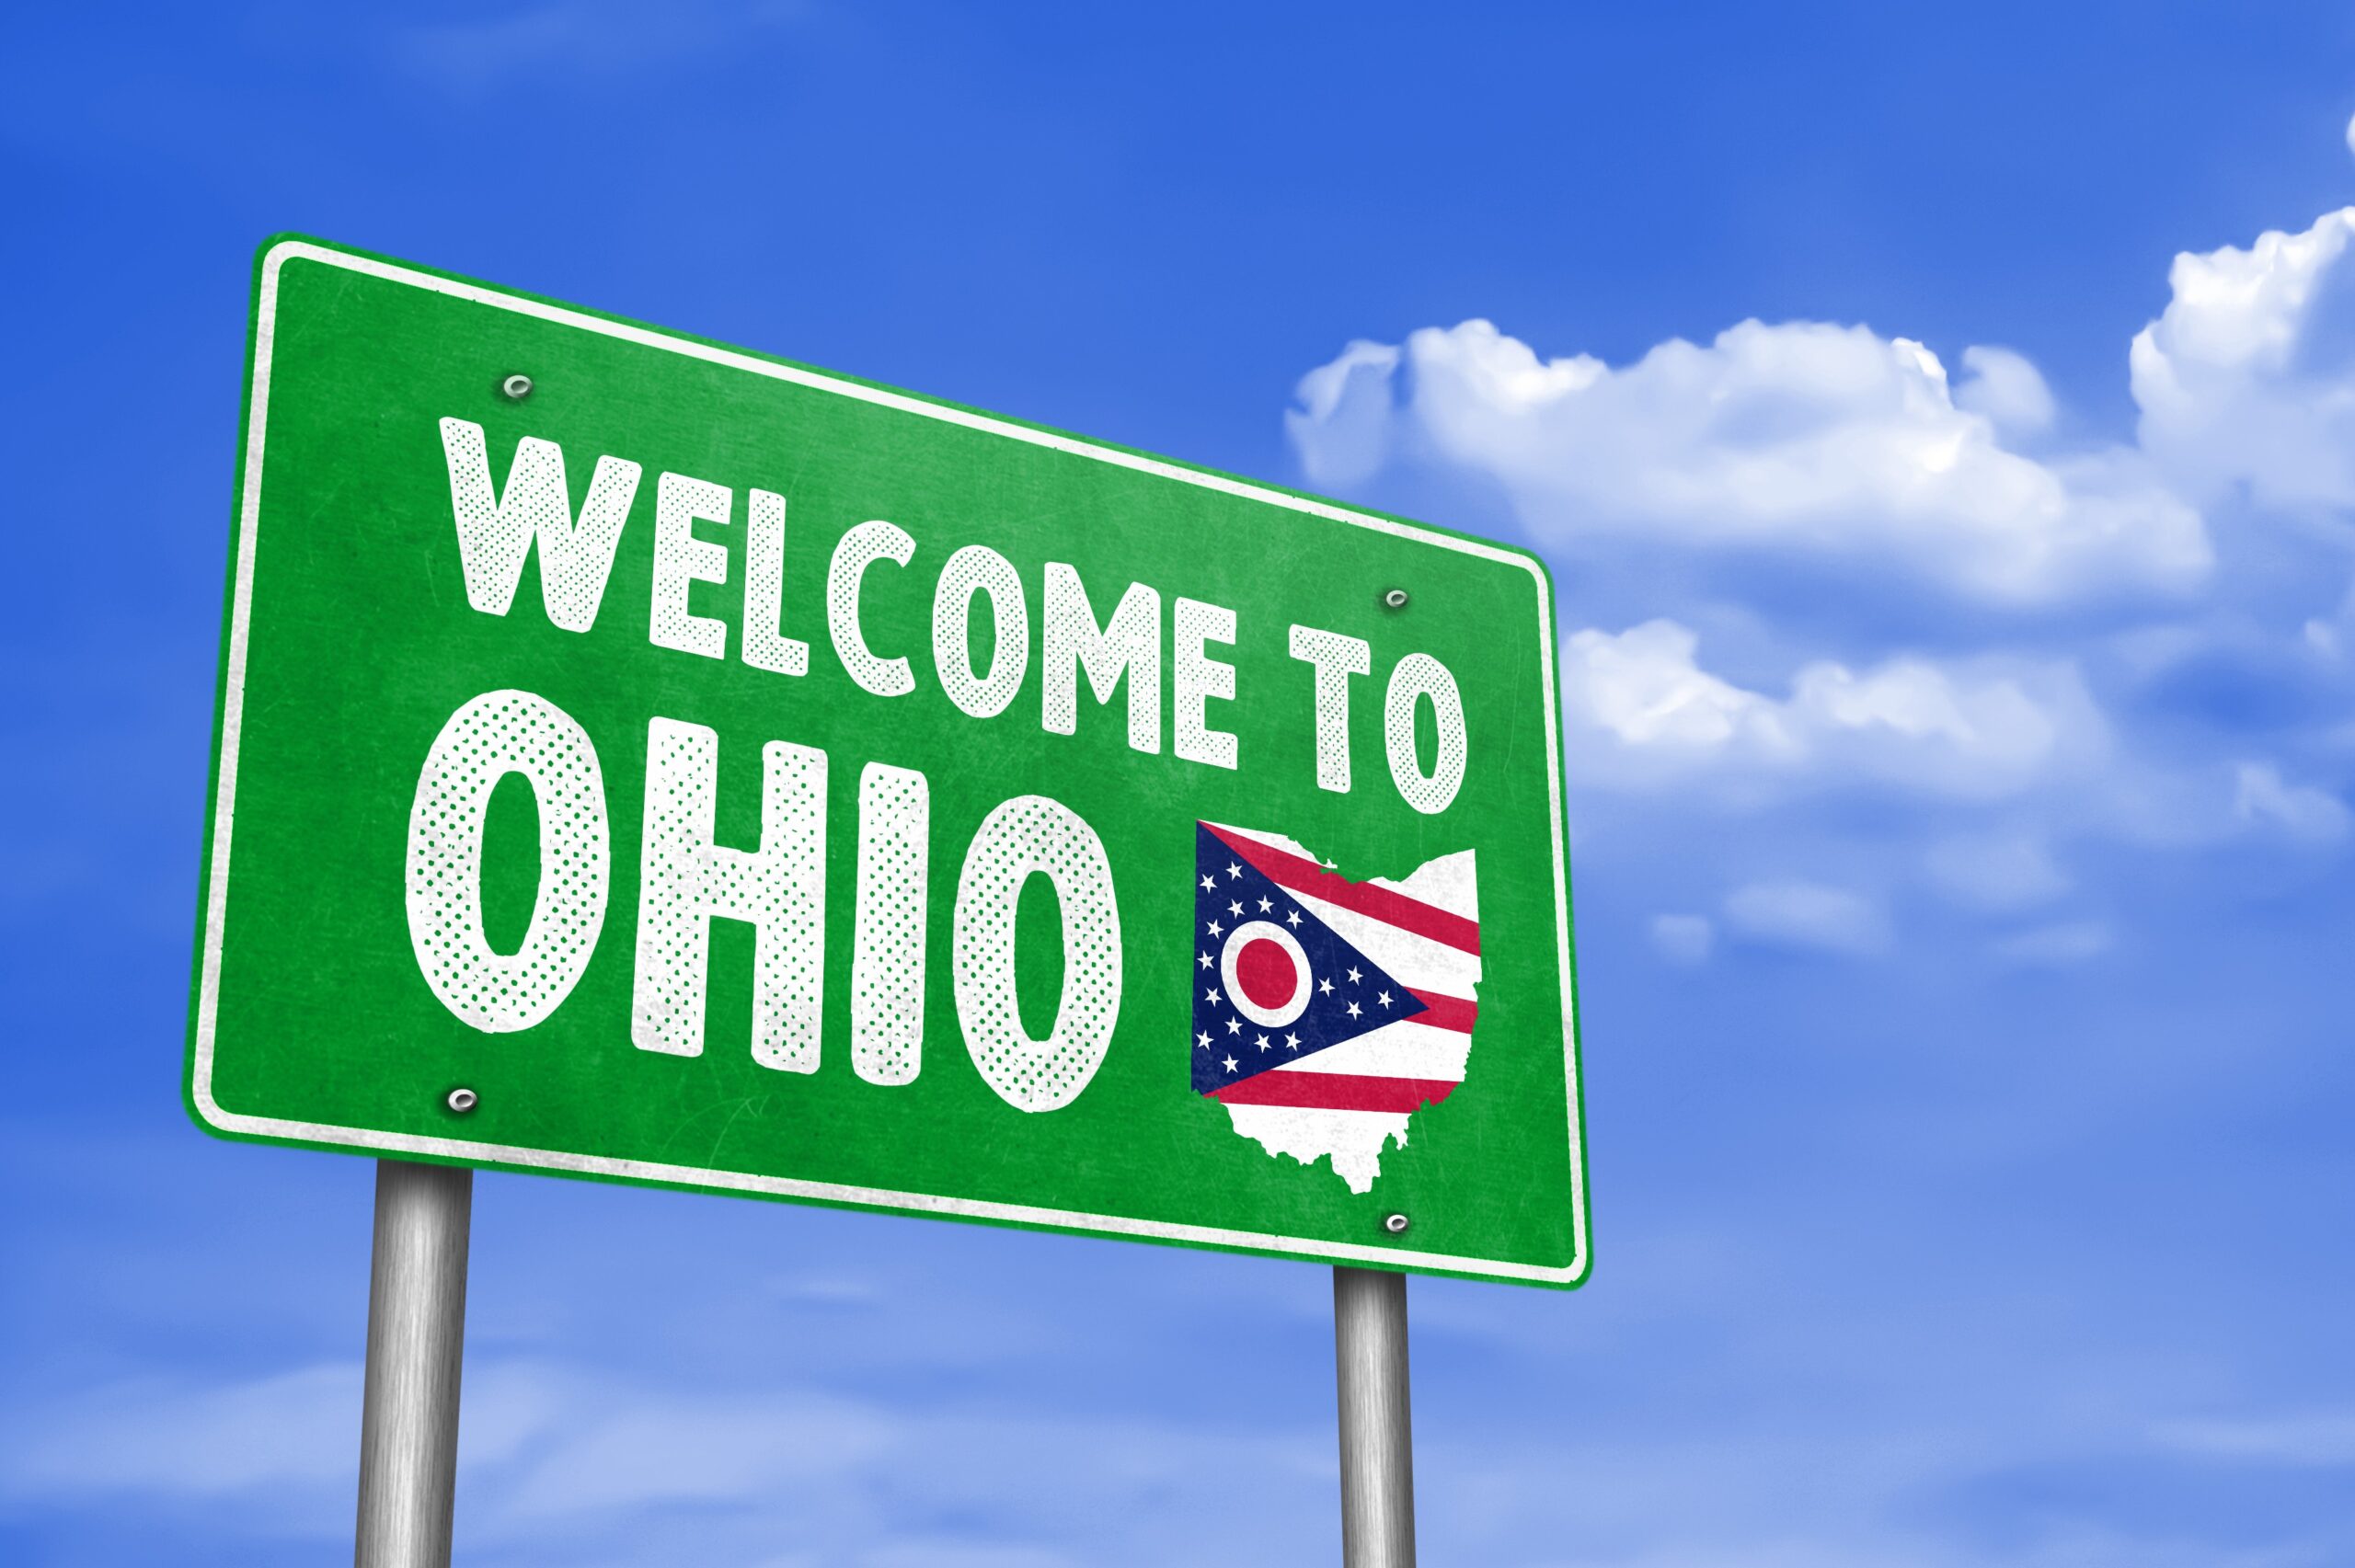 WELCOME TO OHIO - traffic sign message